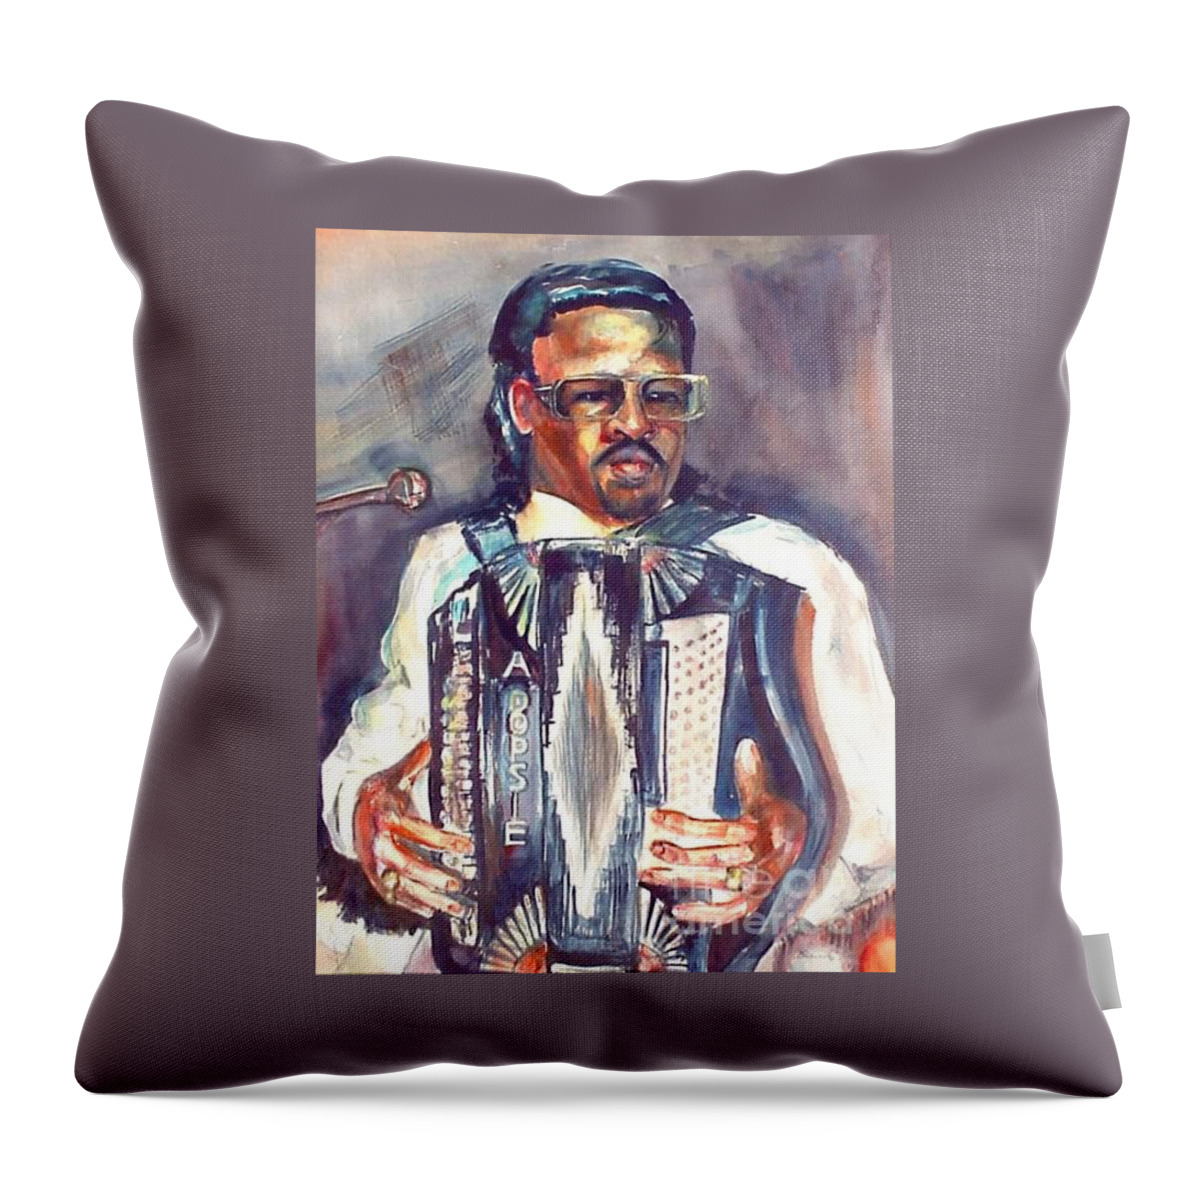 Accordian Throw Pillow featuring the painting Anthony by Beverly Boulet